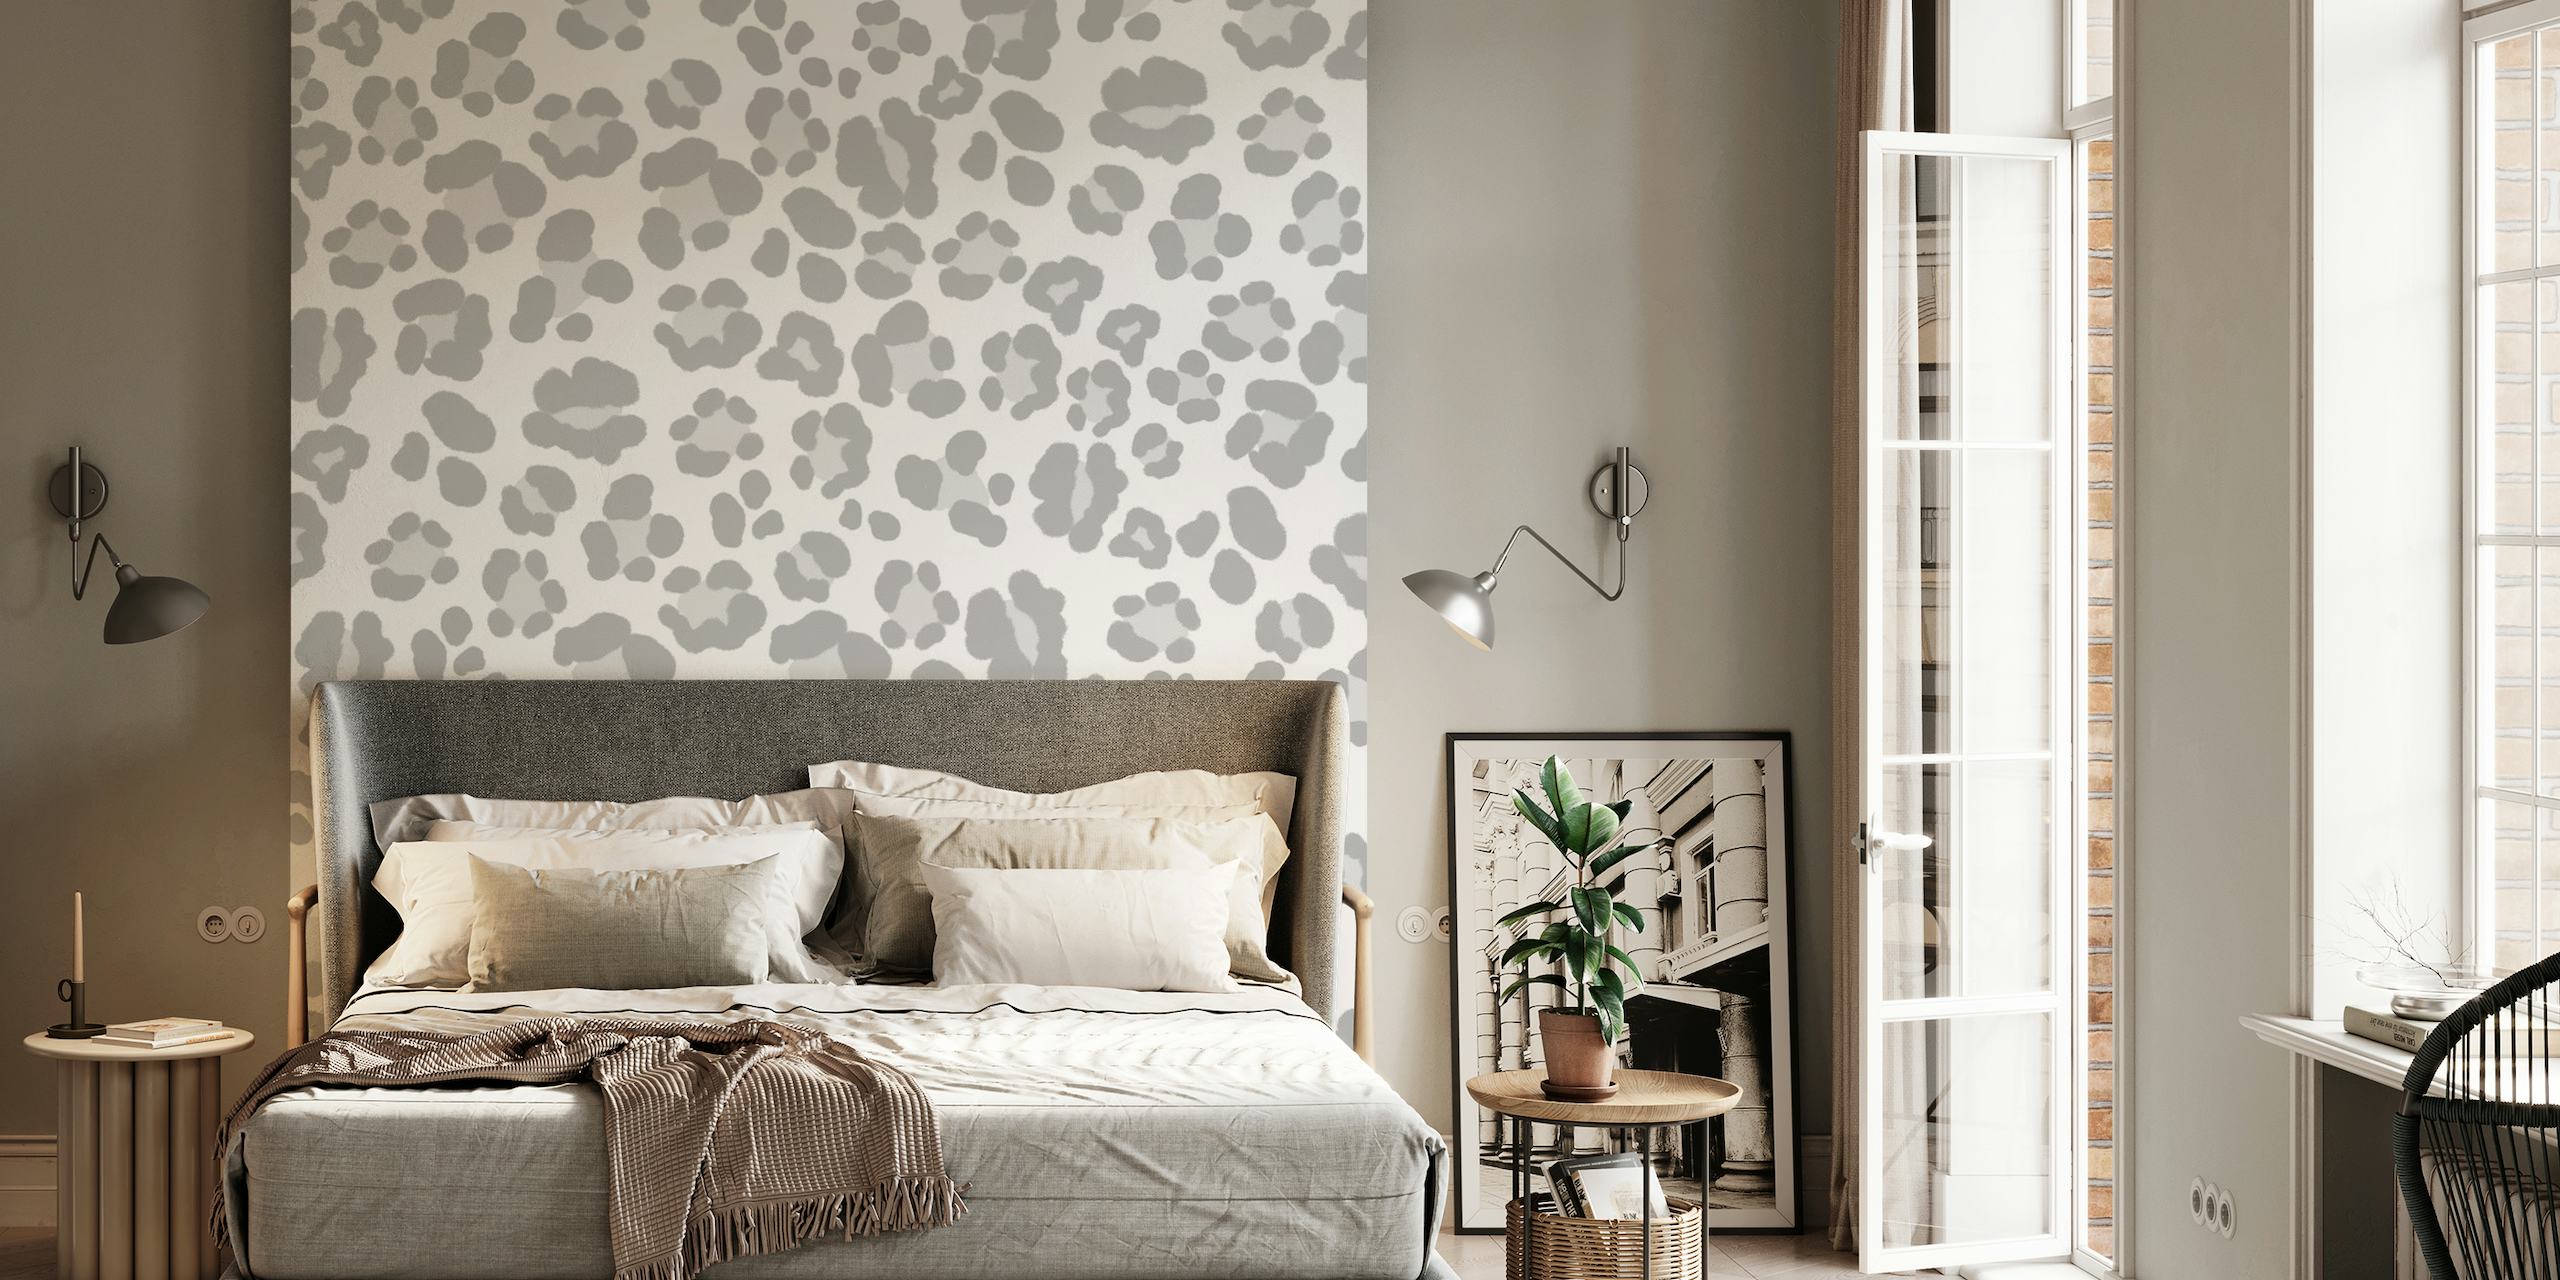 Leopard Print Glam 5 wall mural with a subtle grey leopard pattern for chic interior decor